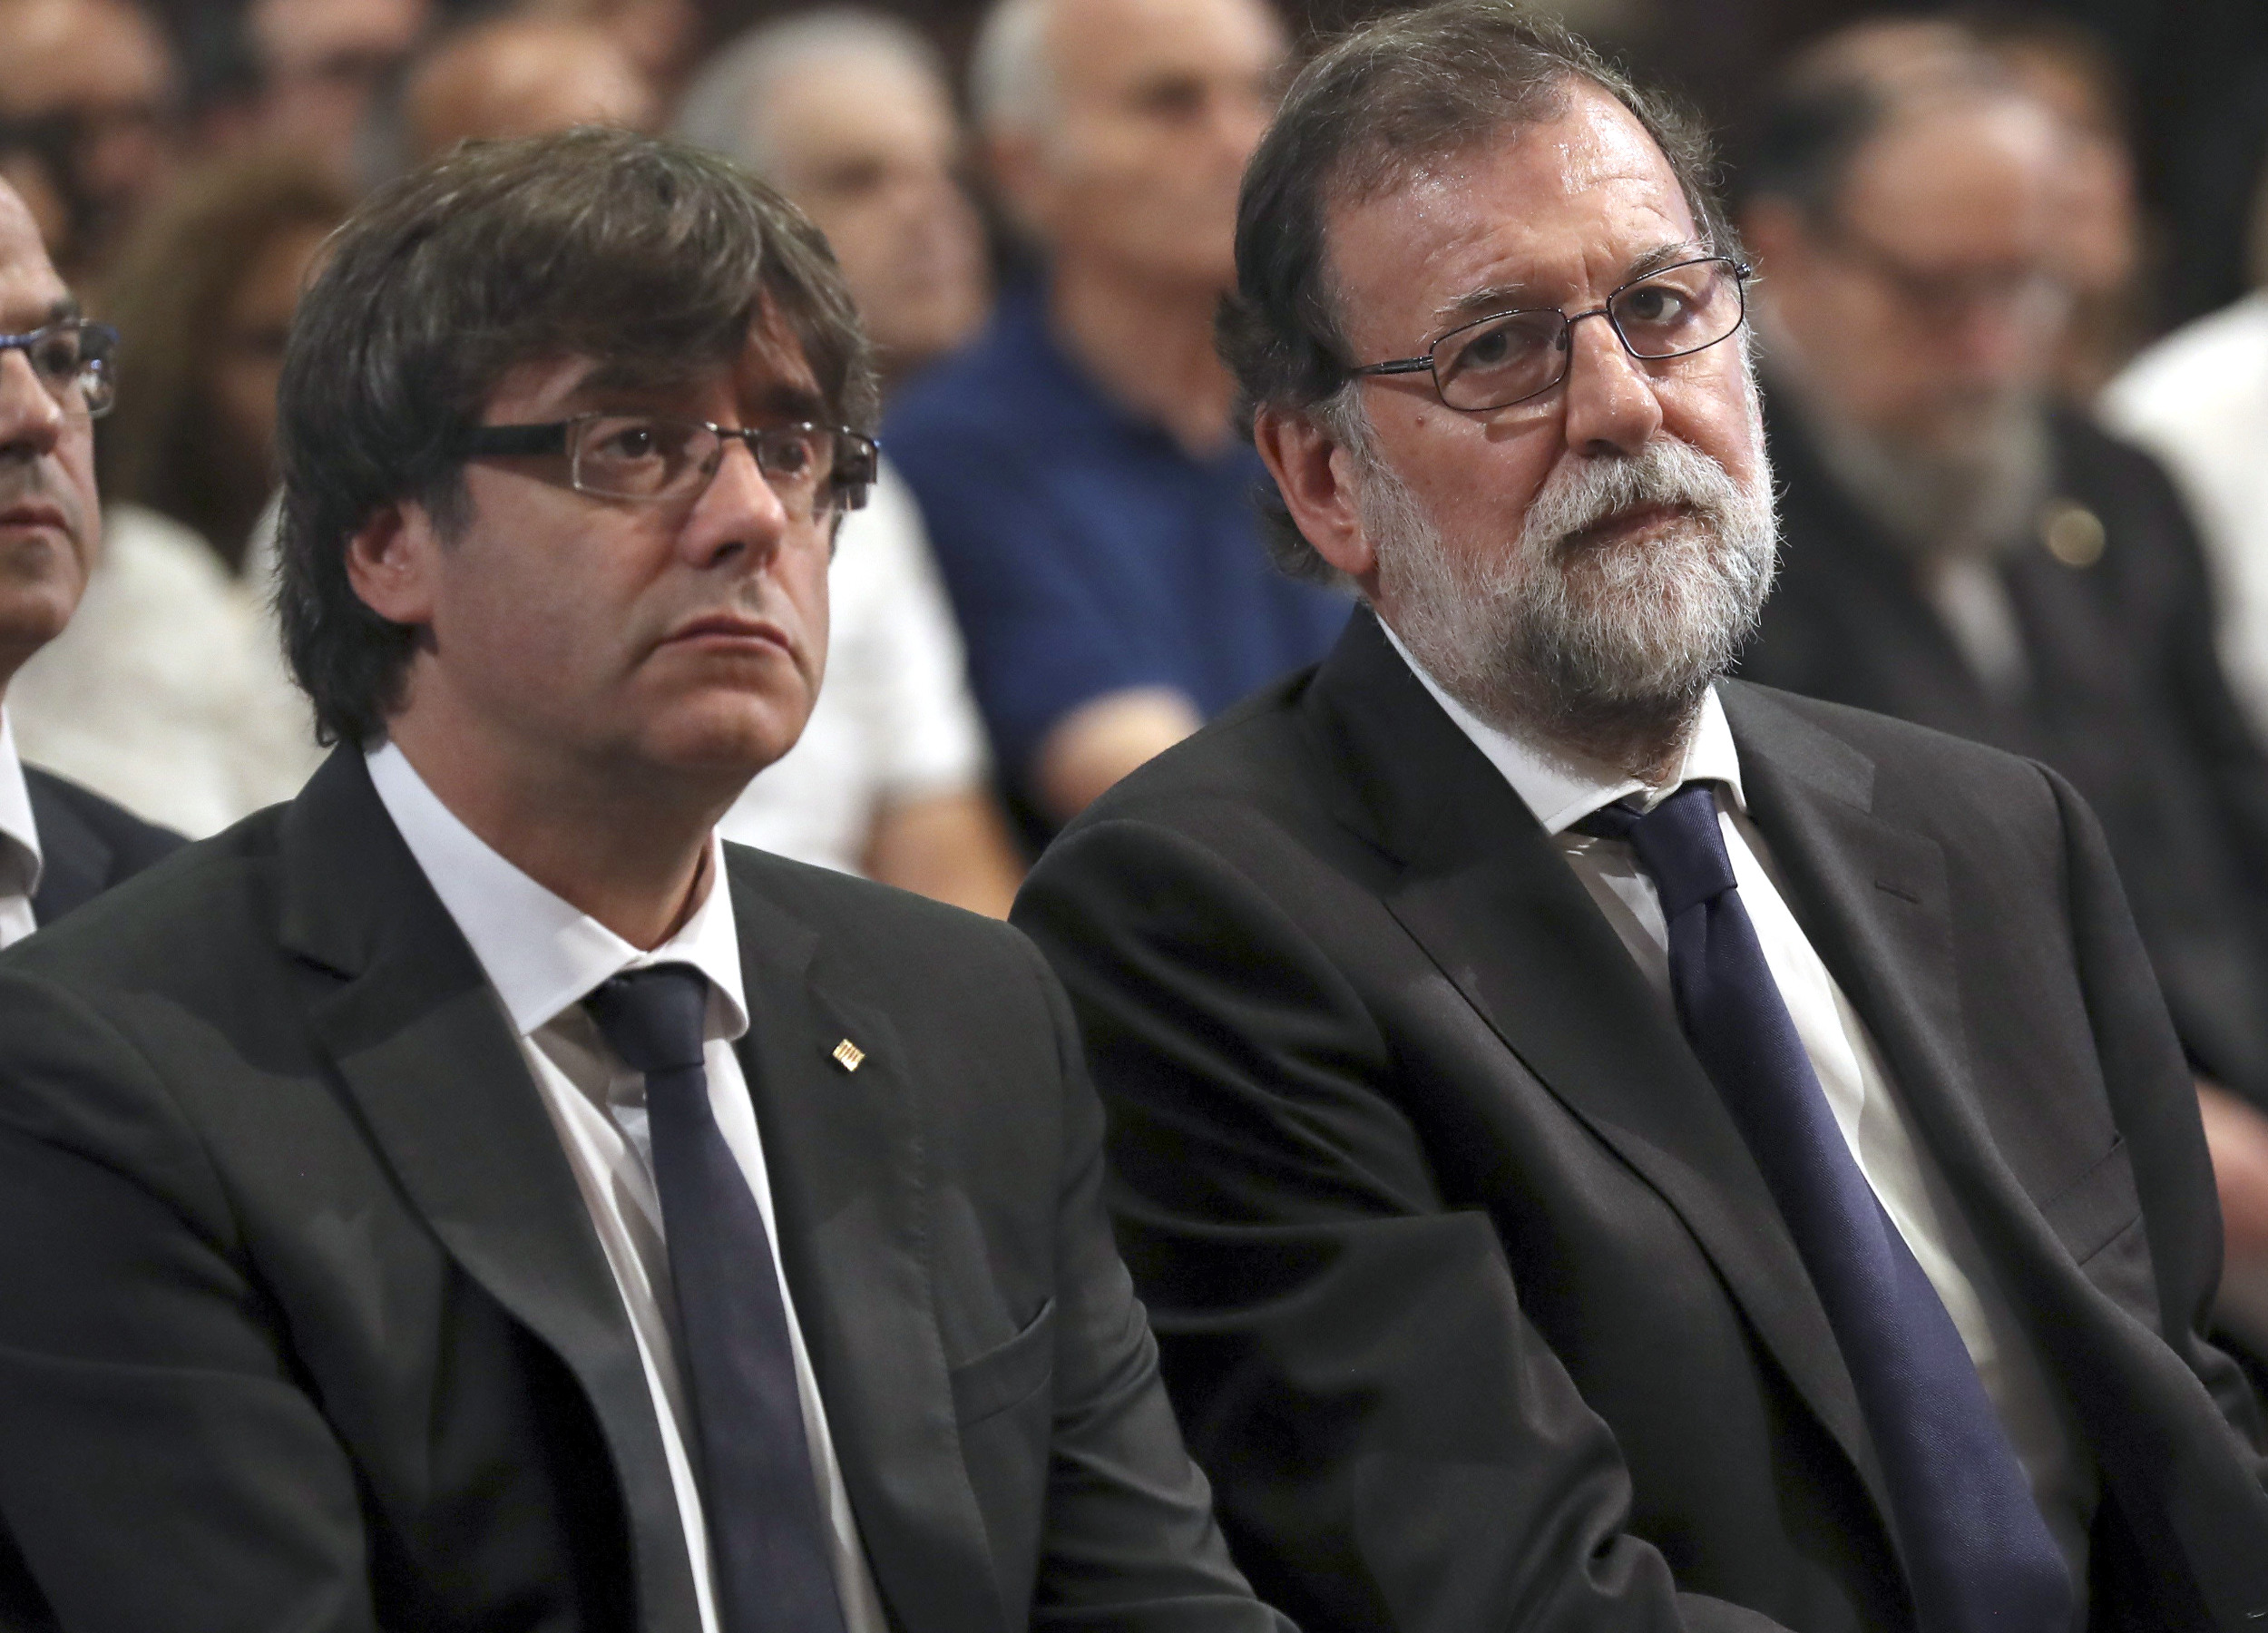 Carles Puigdemont and Mariano Rajoy sat together during mass at Sagrada Familia after Barcelona terrorist attacks (by ACN)